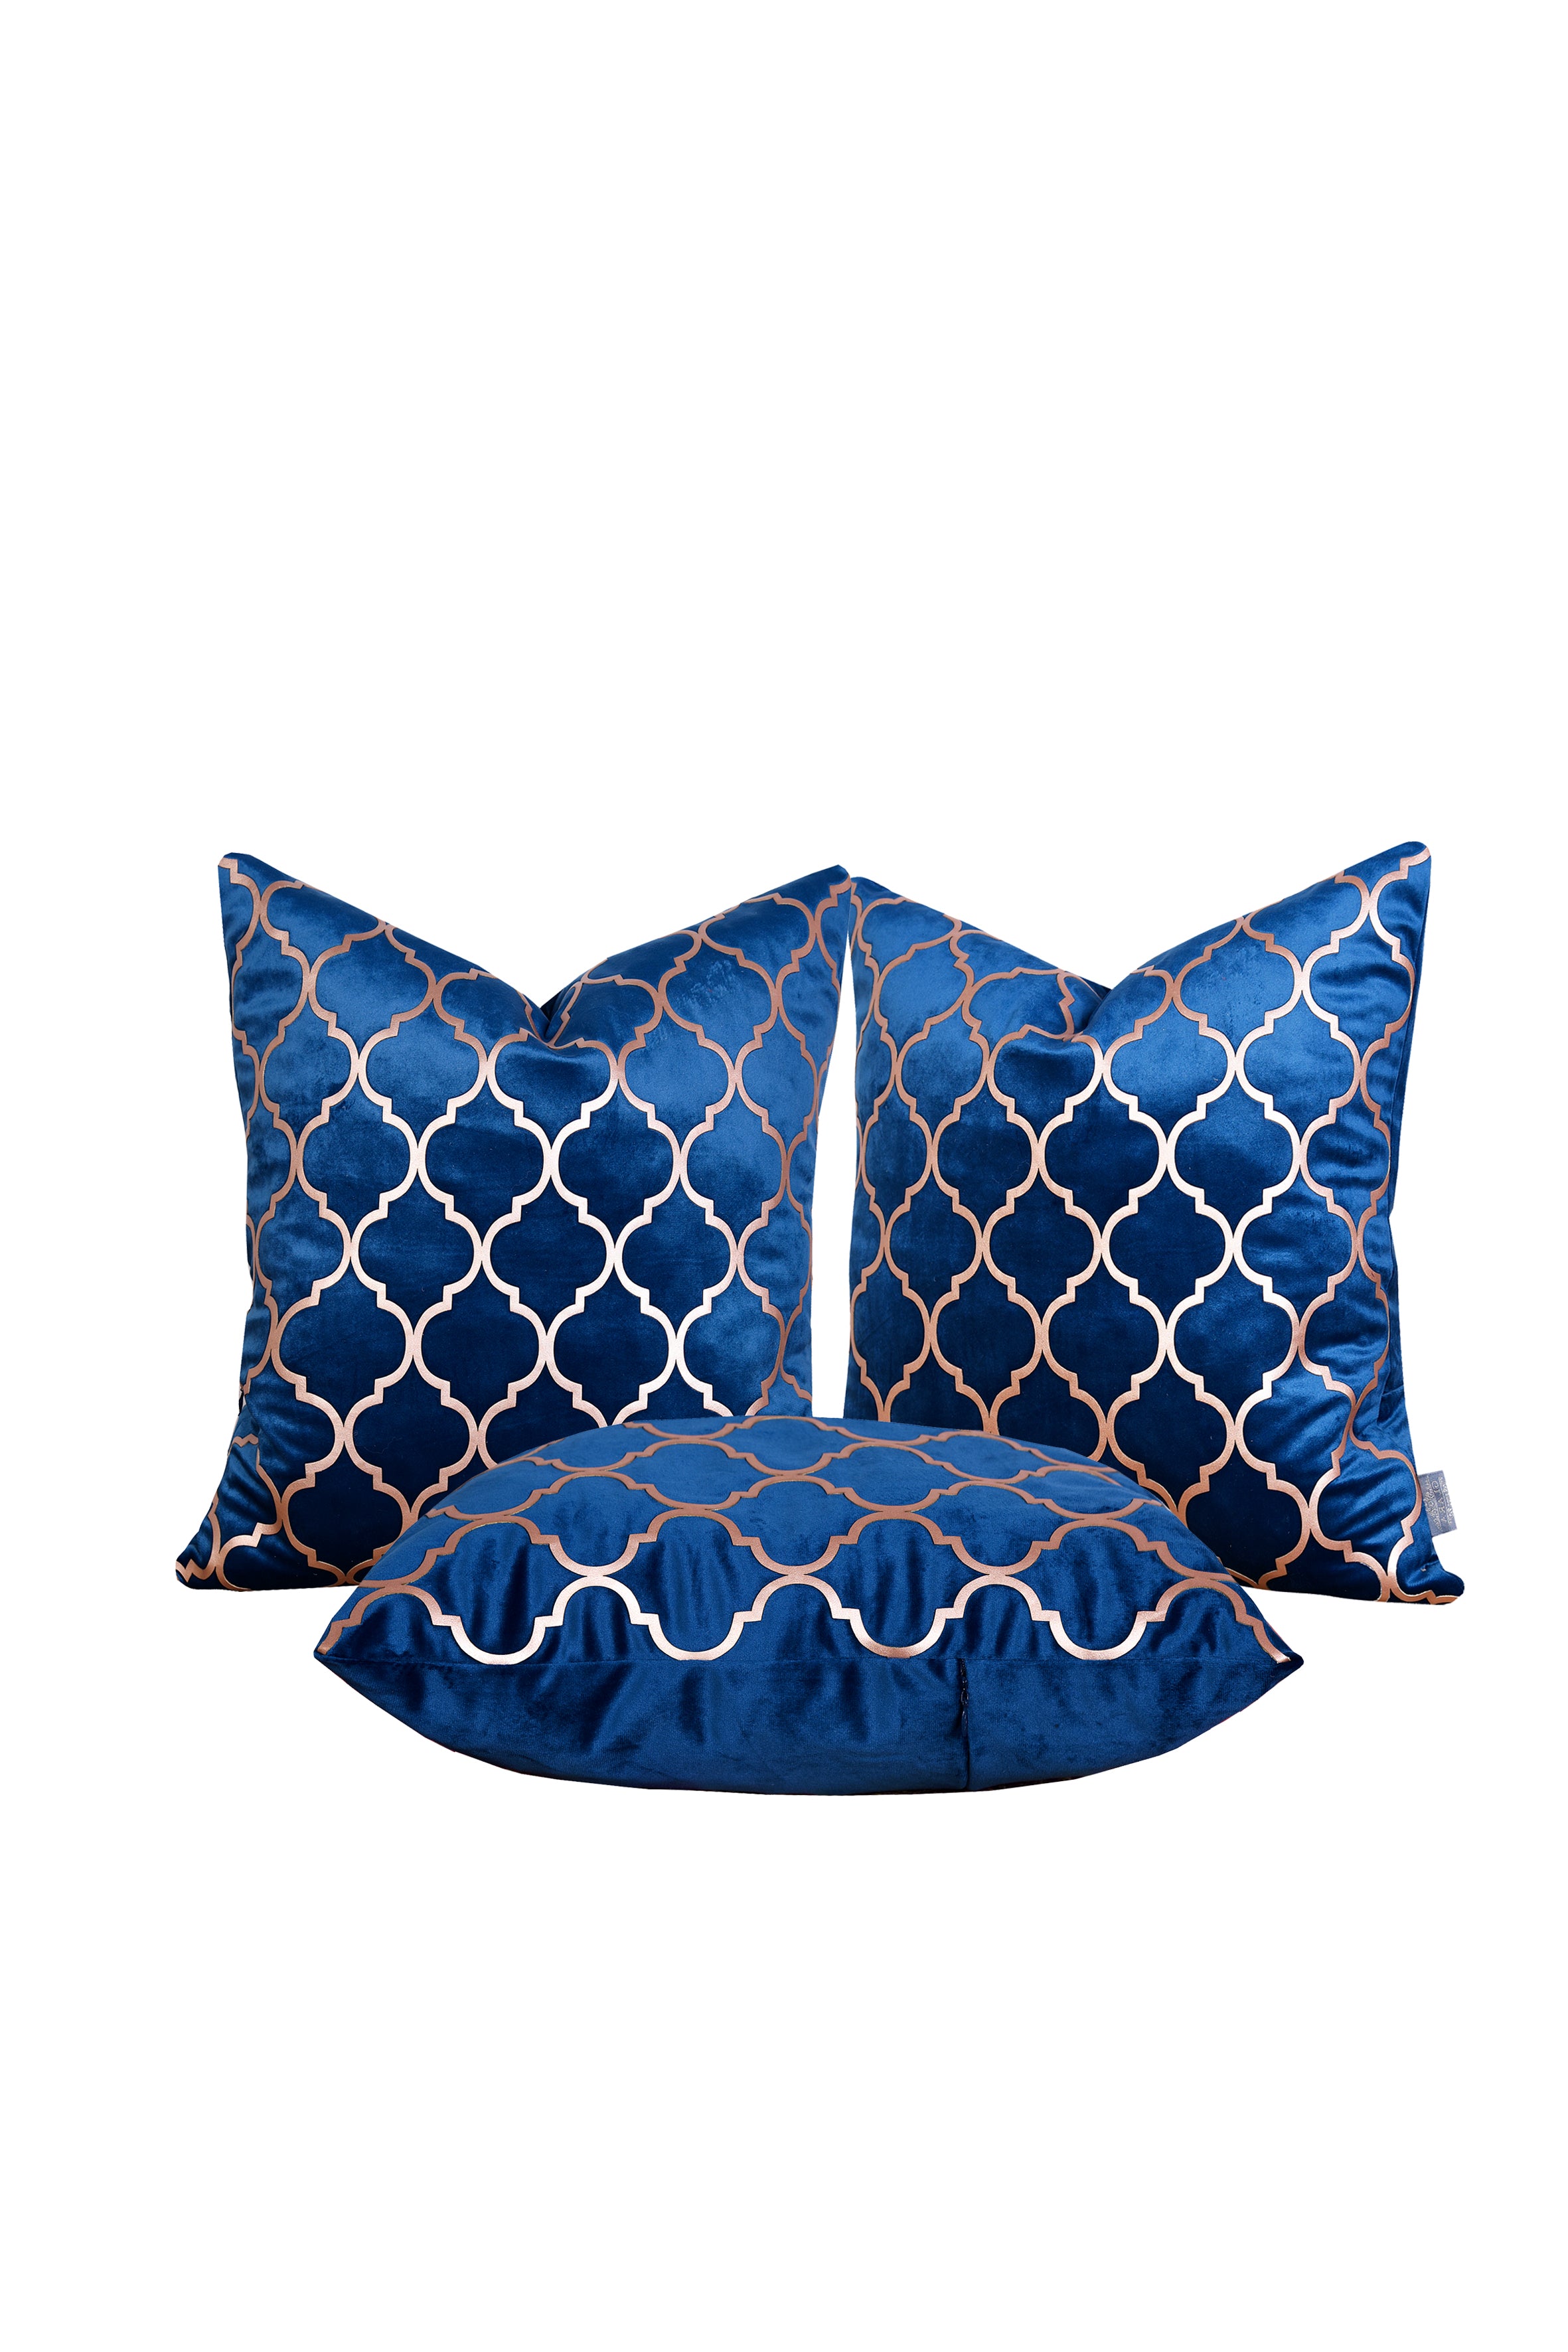 Luxury Velvet Throw Pillow Cover With Gold Accent ( Blue Cushion Cover)